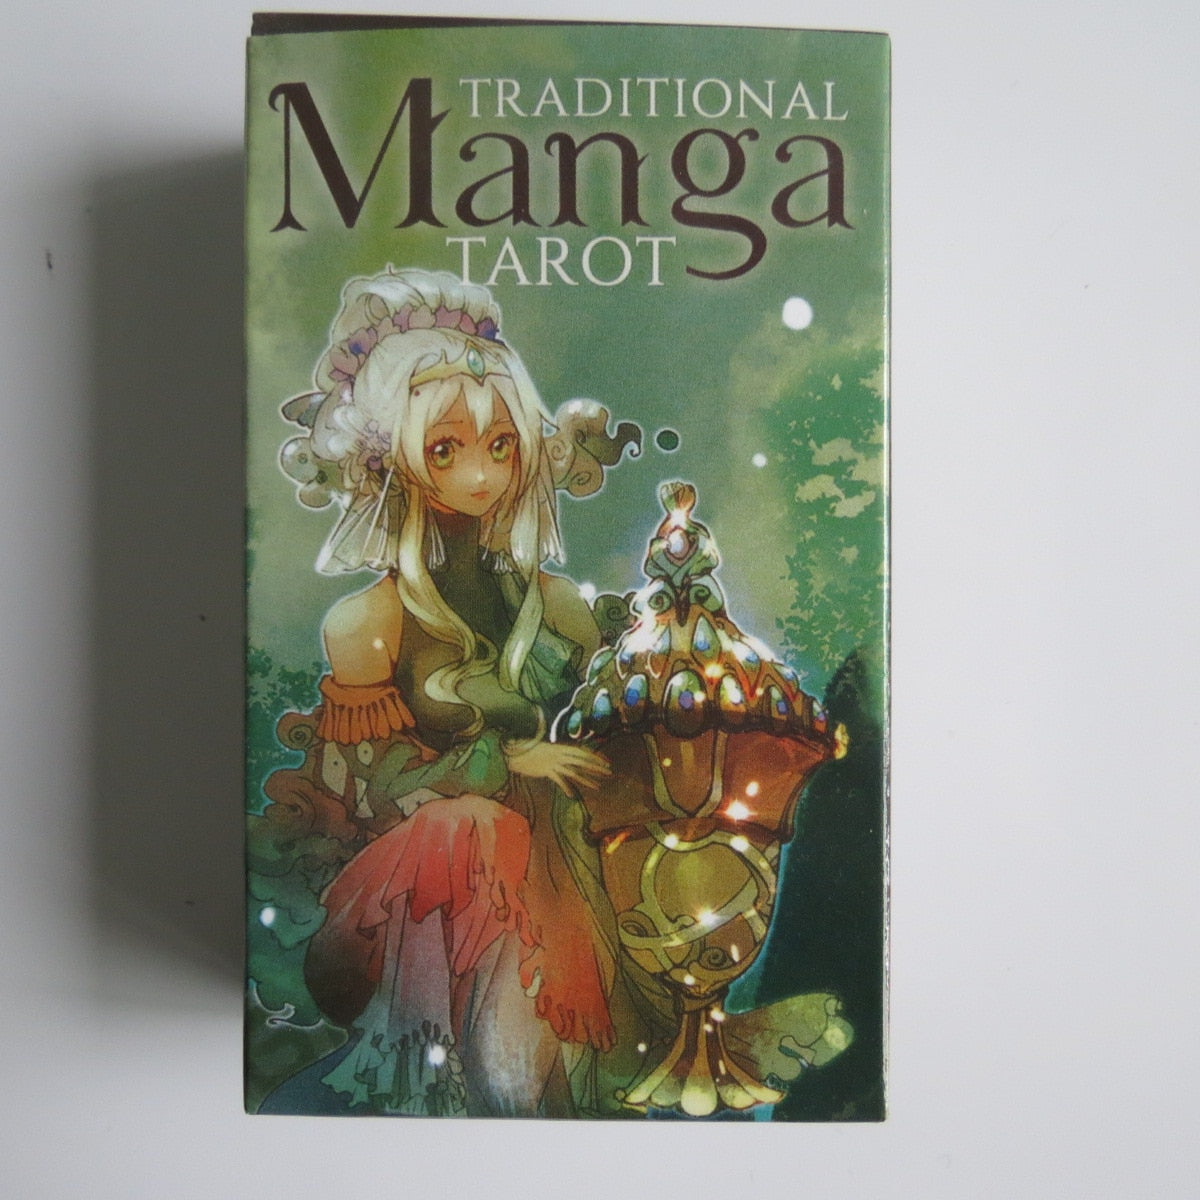 Traditional Manga Beautiful Tarot Oracles Cards For Mysterious Divination Entertainment